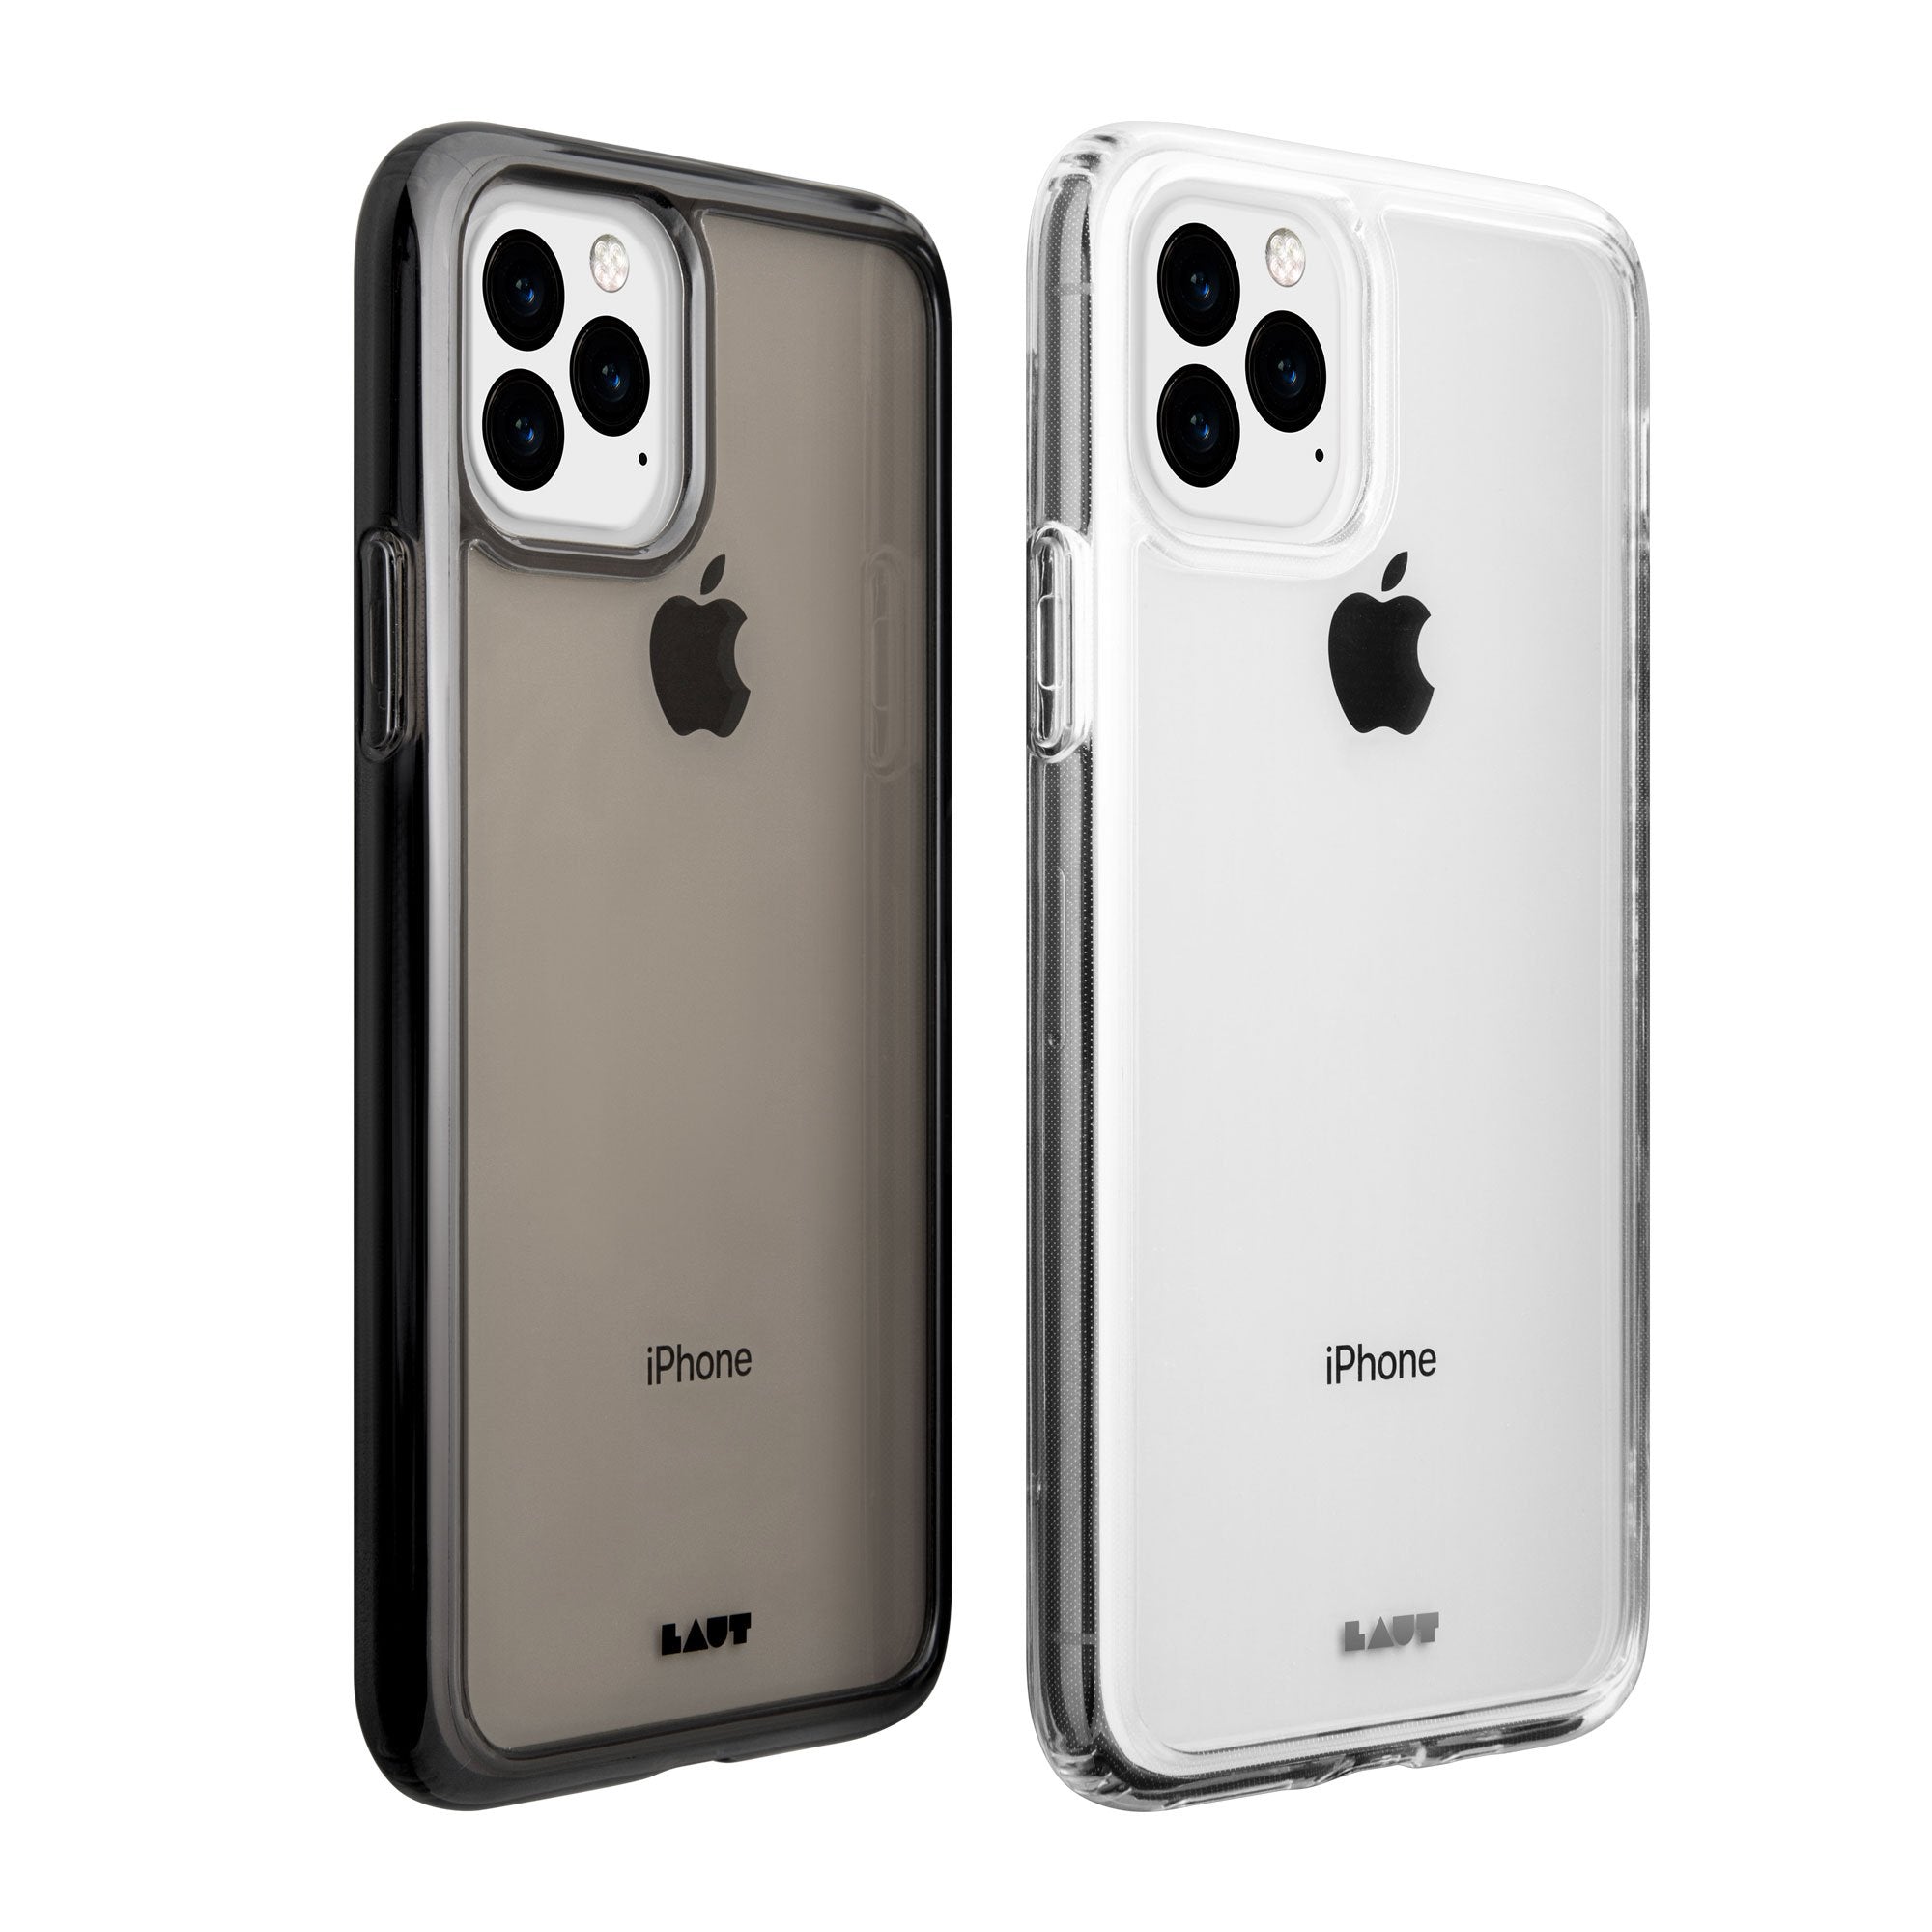 CRYSTAL-X for iPhone 11 Series - LAUT Japan